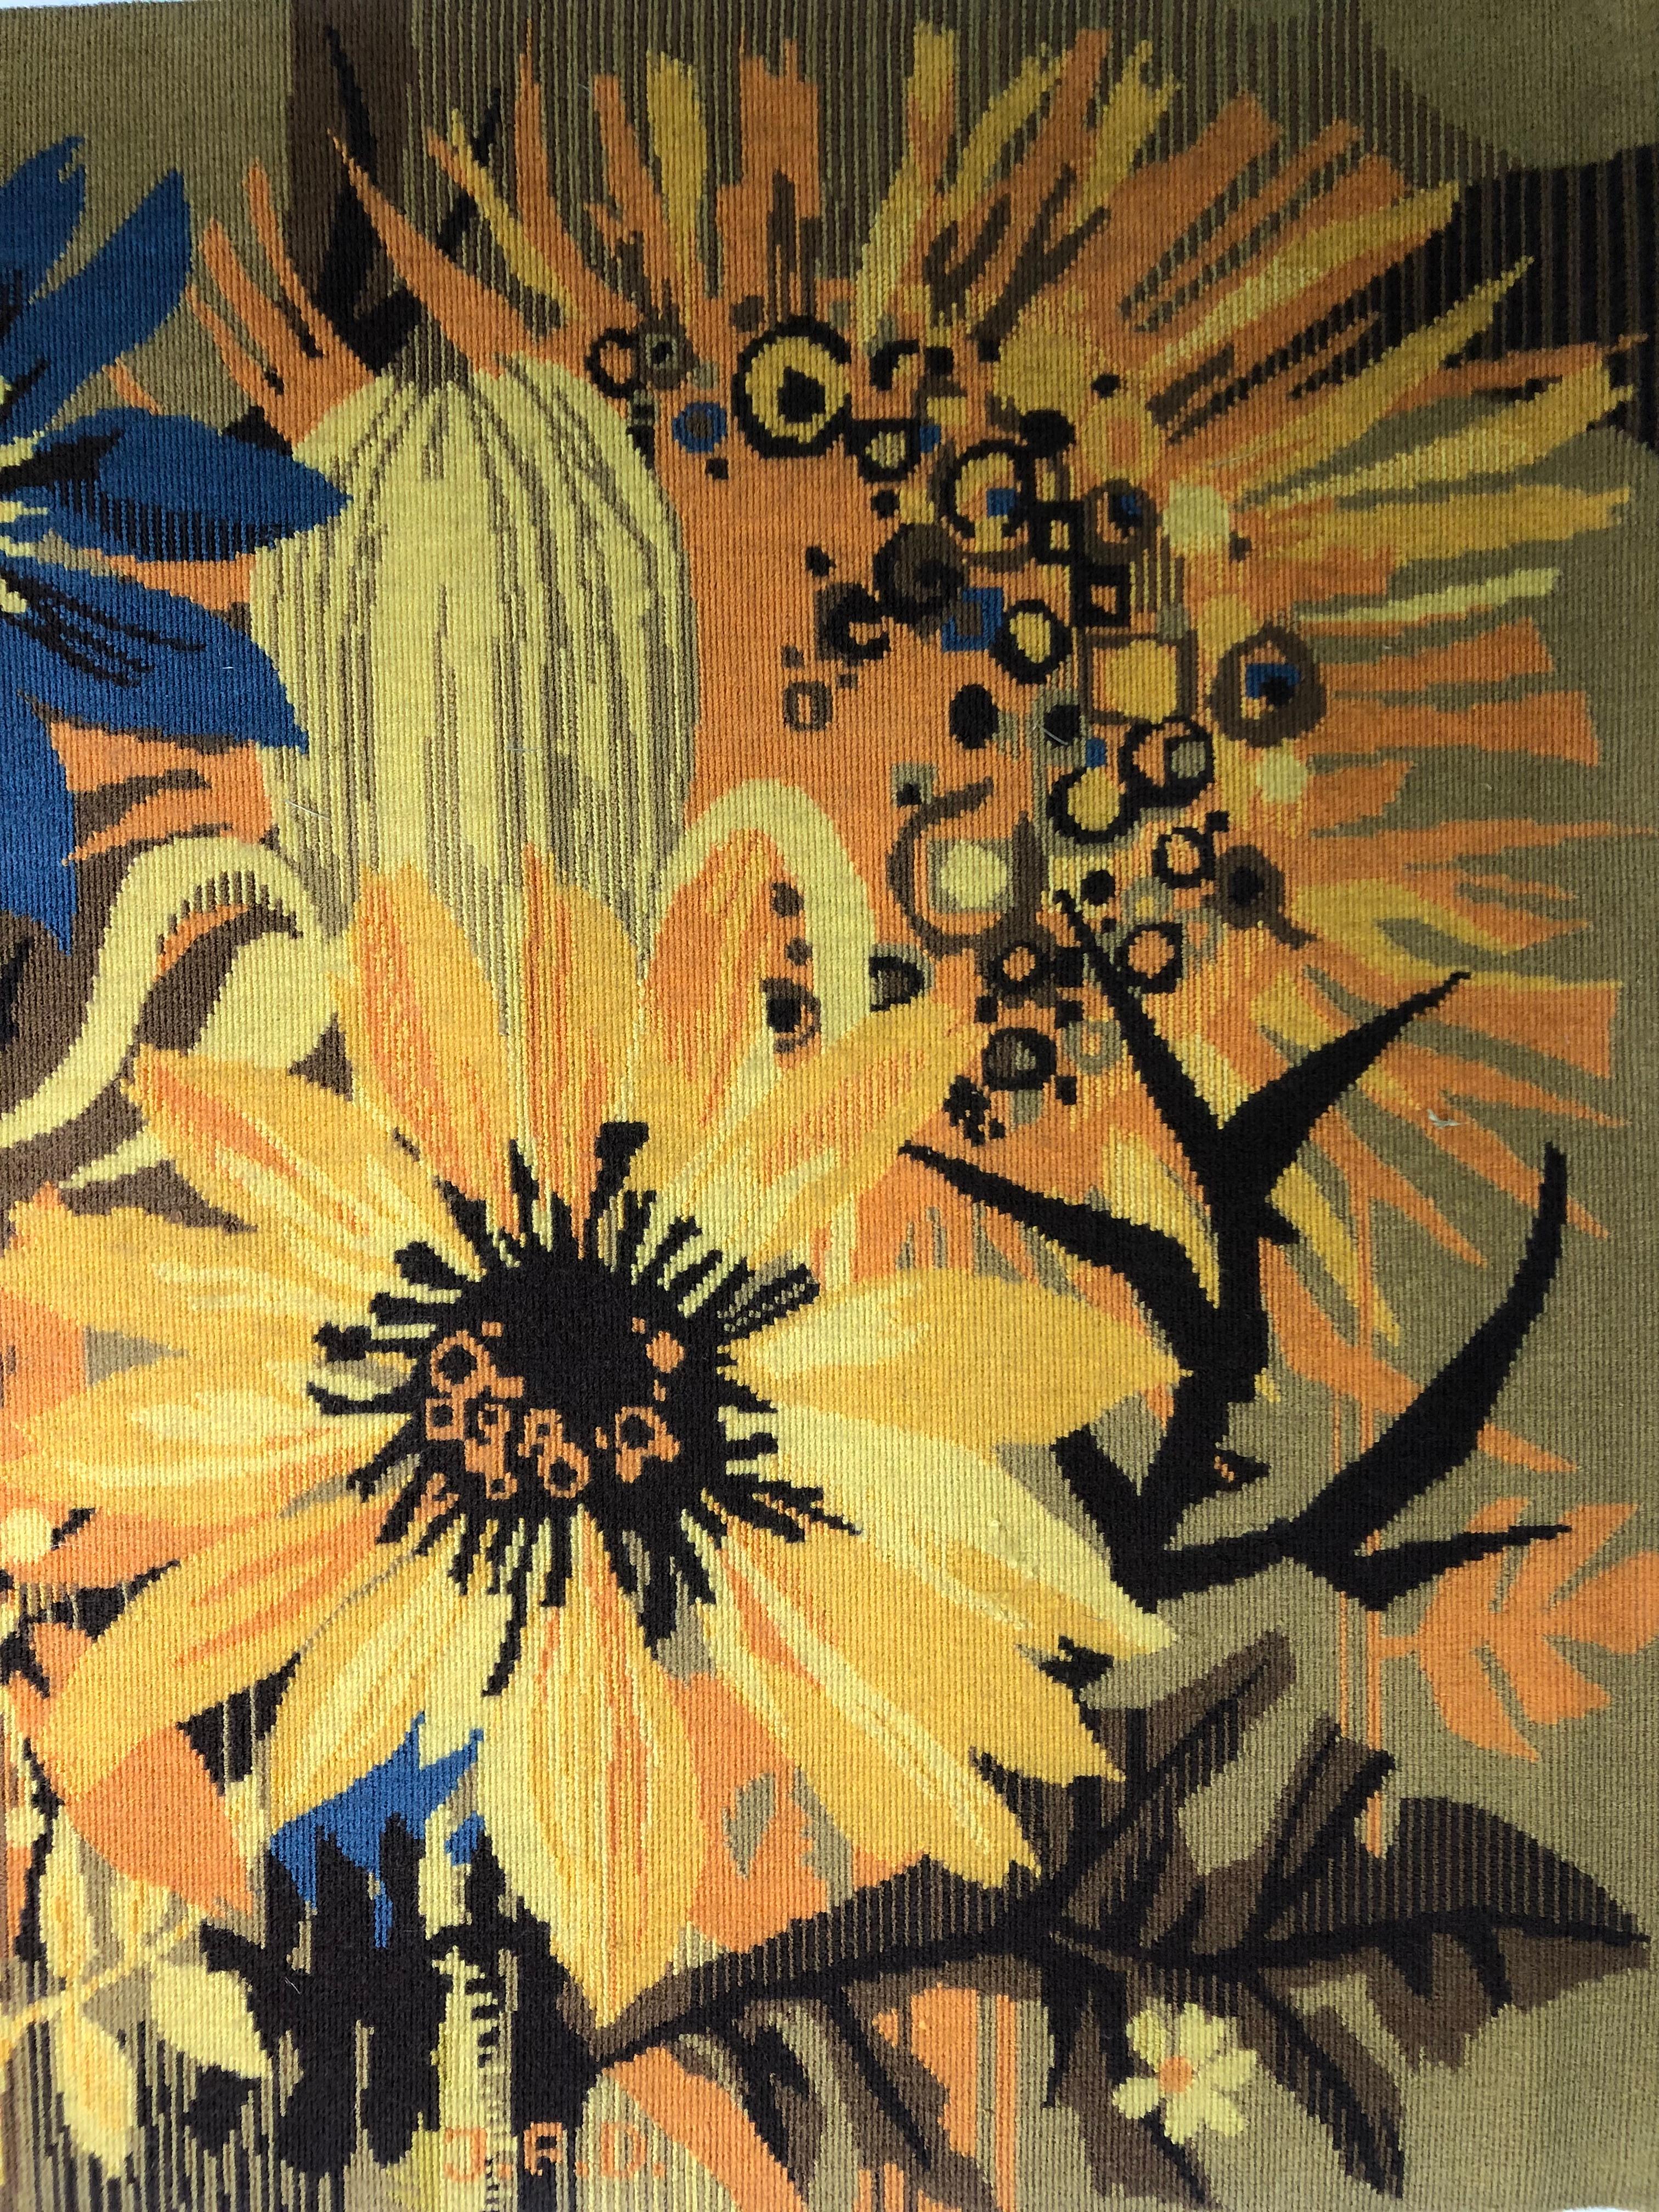 Tapestry in “pure laine vierge” signed by Hervé Lelong
Entitled “Heliotrope”
Depicting a colorful flowers scene in the style of J.Lurcat
Hand woven wool 

